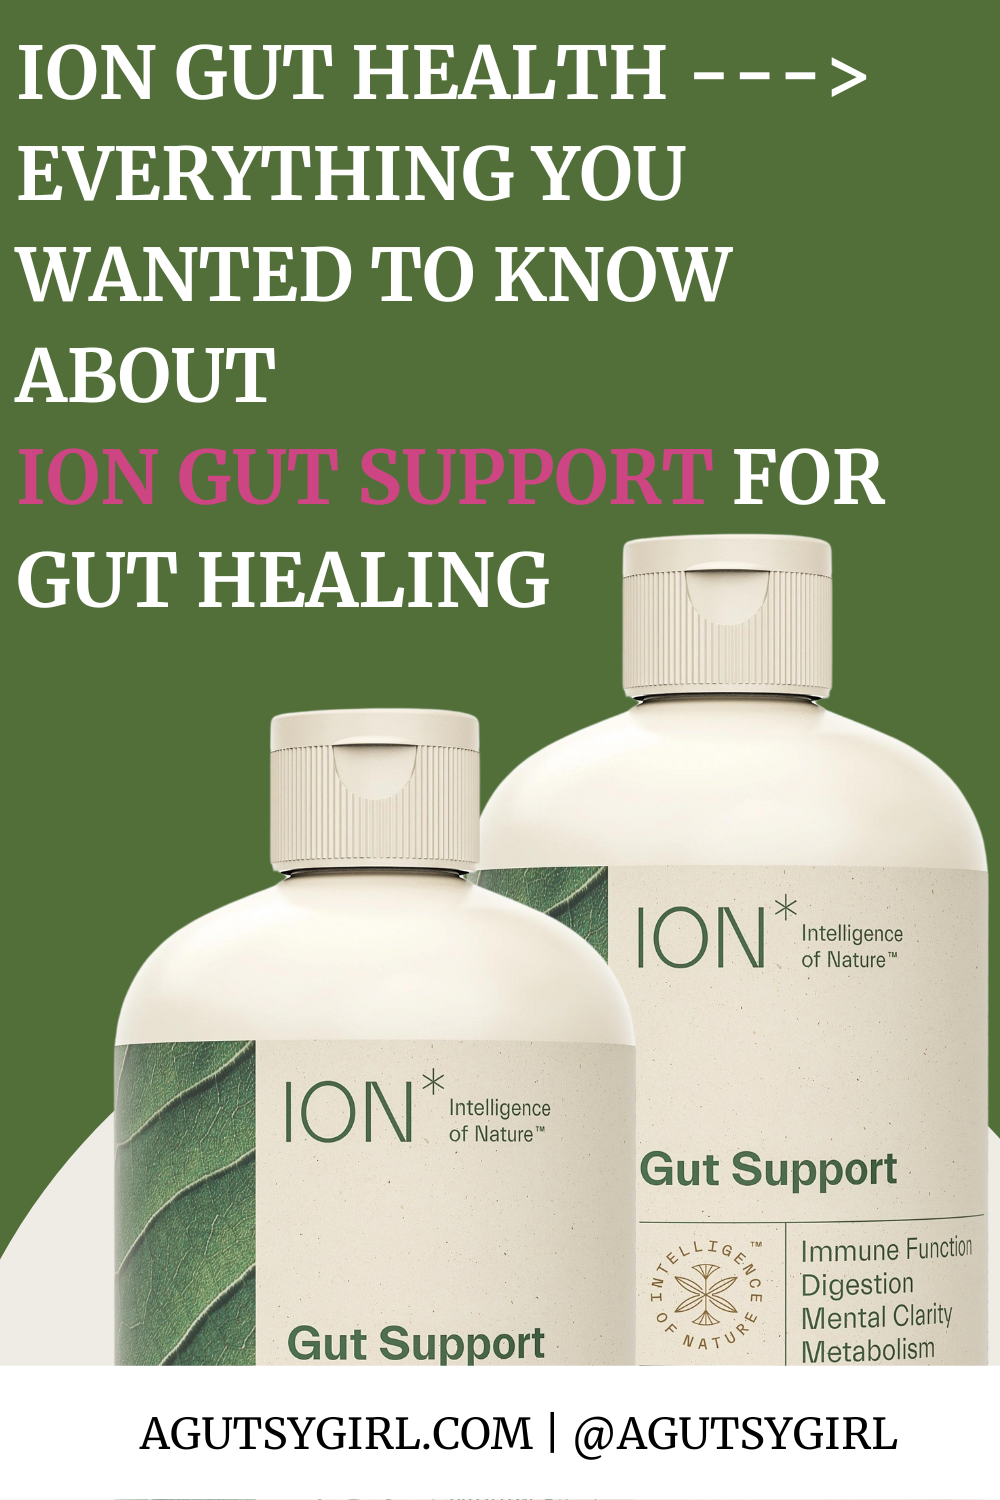 ION Gut Support agutsygirl.com #ion #ionbiome #inflammation